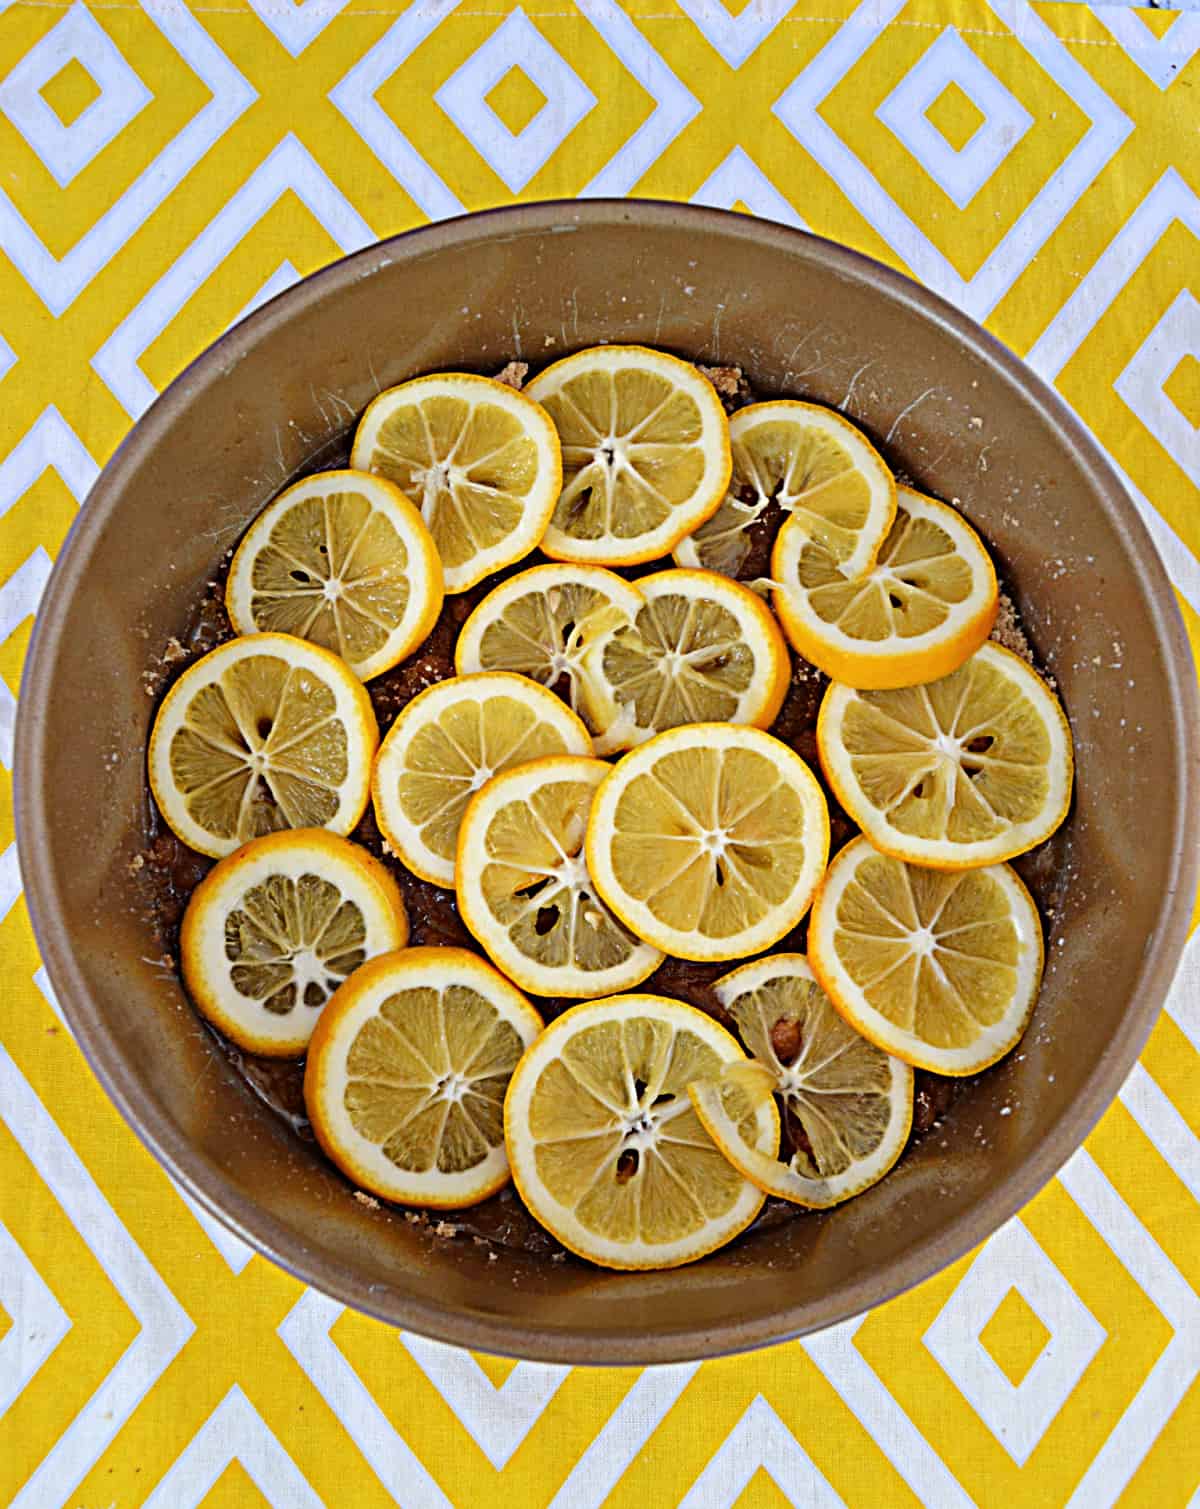 A pan with lemon in the bottom.